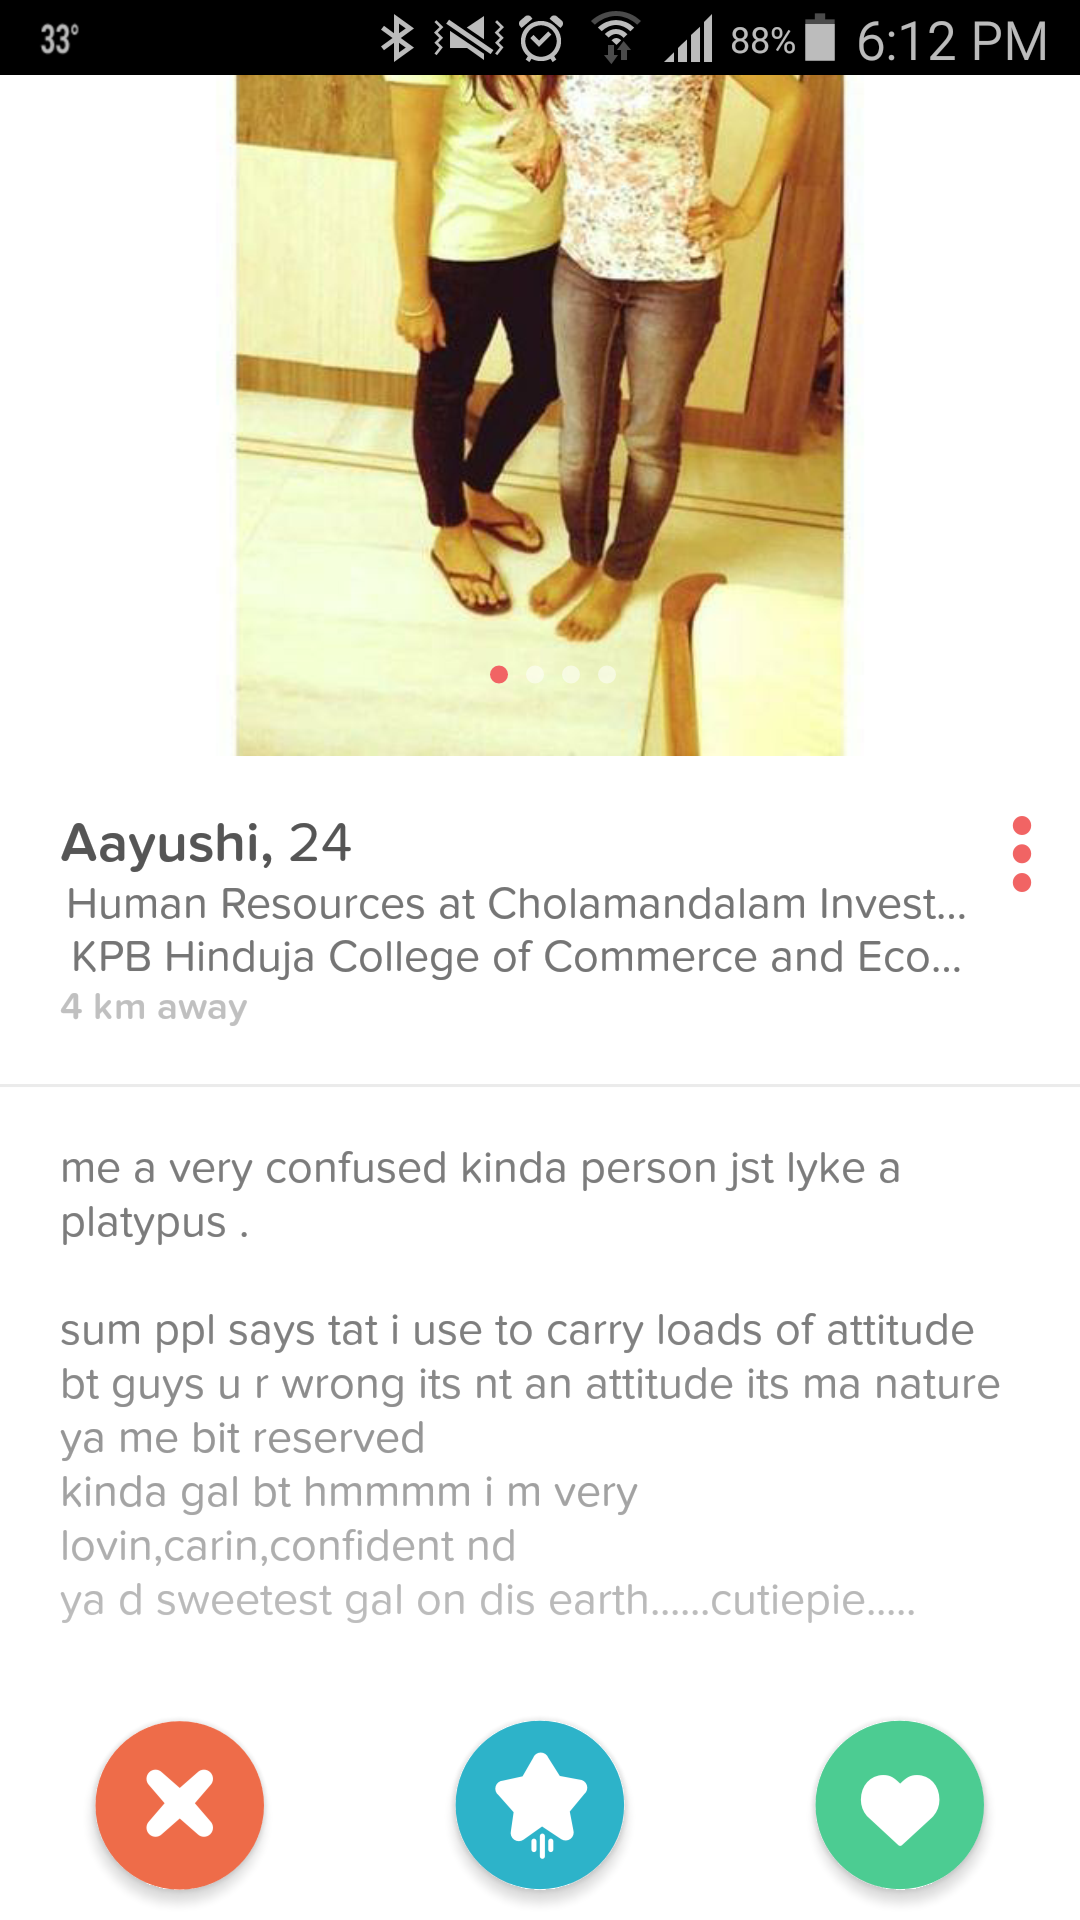 website - No 188% Aayushi, 24 Human Resources at Cholamandalam Invest... Kpb Hinduja College of Commerce and Eco... km away me a very confused kinda person jst lyke a platypus sum ppl says tat i use to carry loads of attitude bt guys ur wrong its nt an at